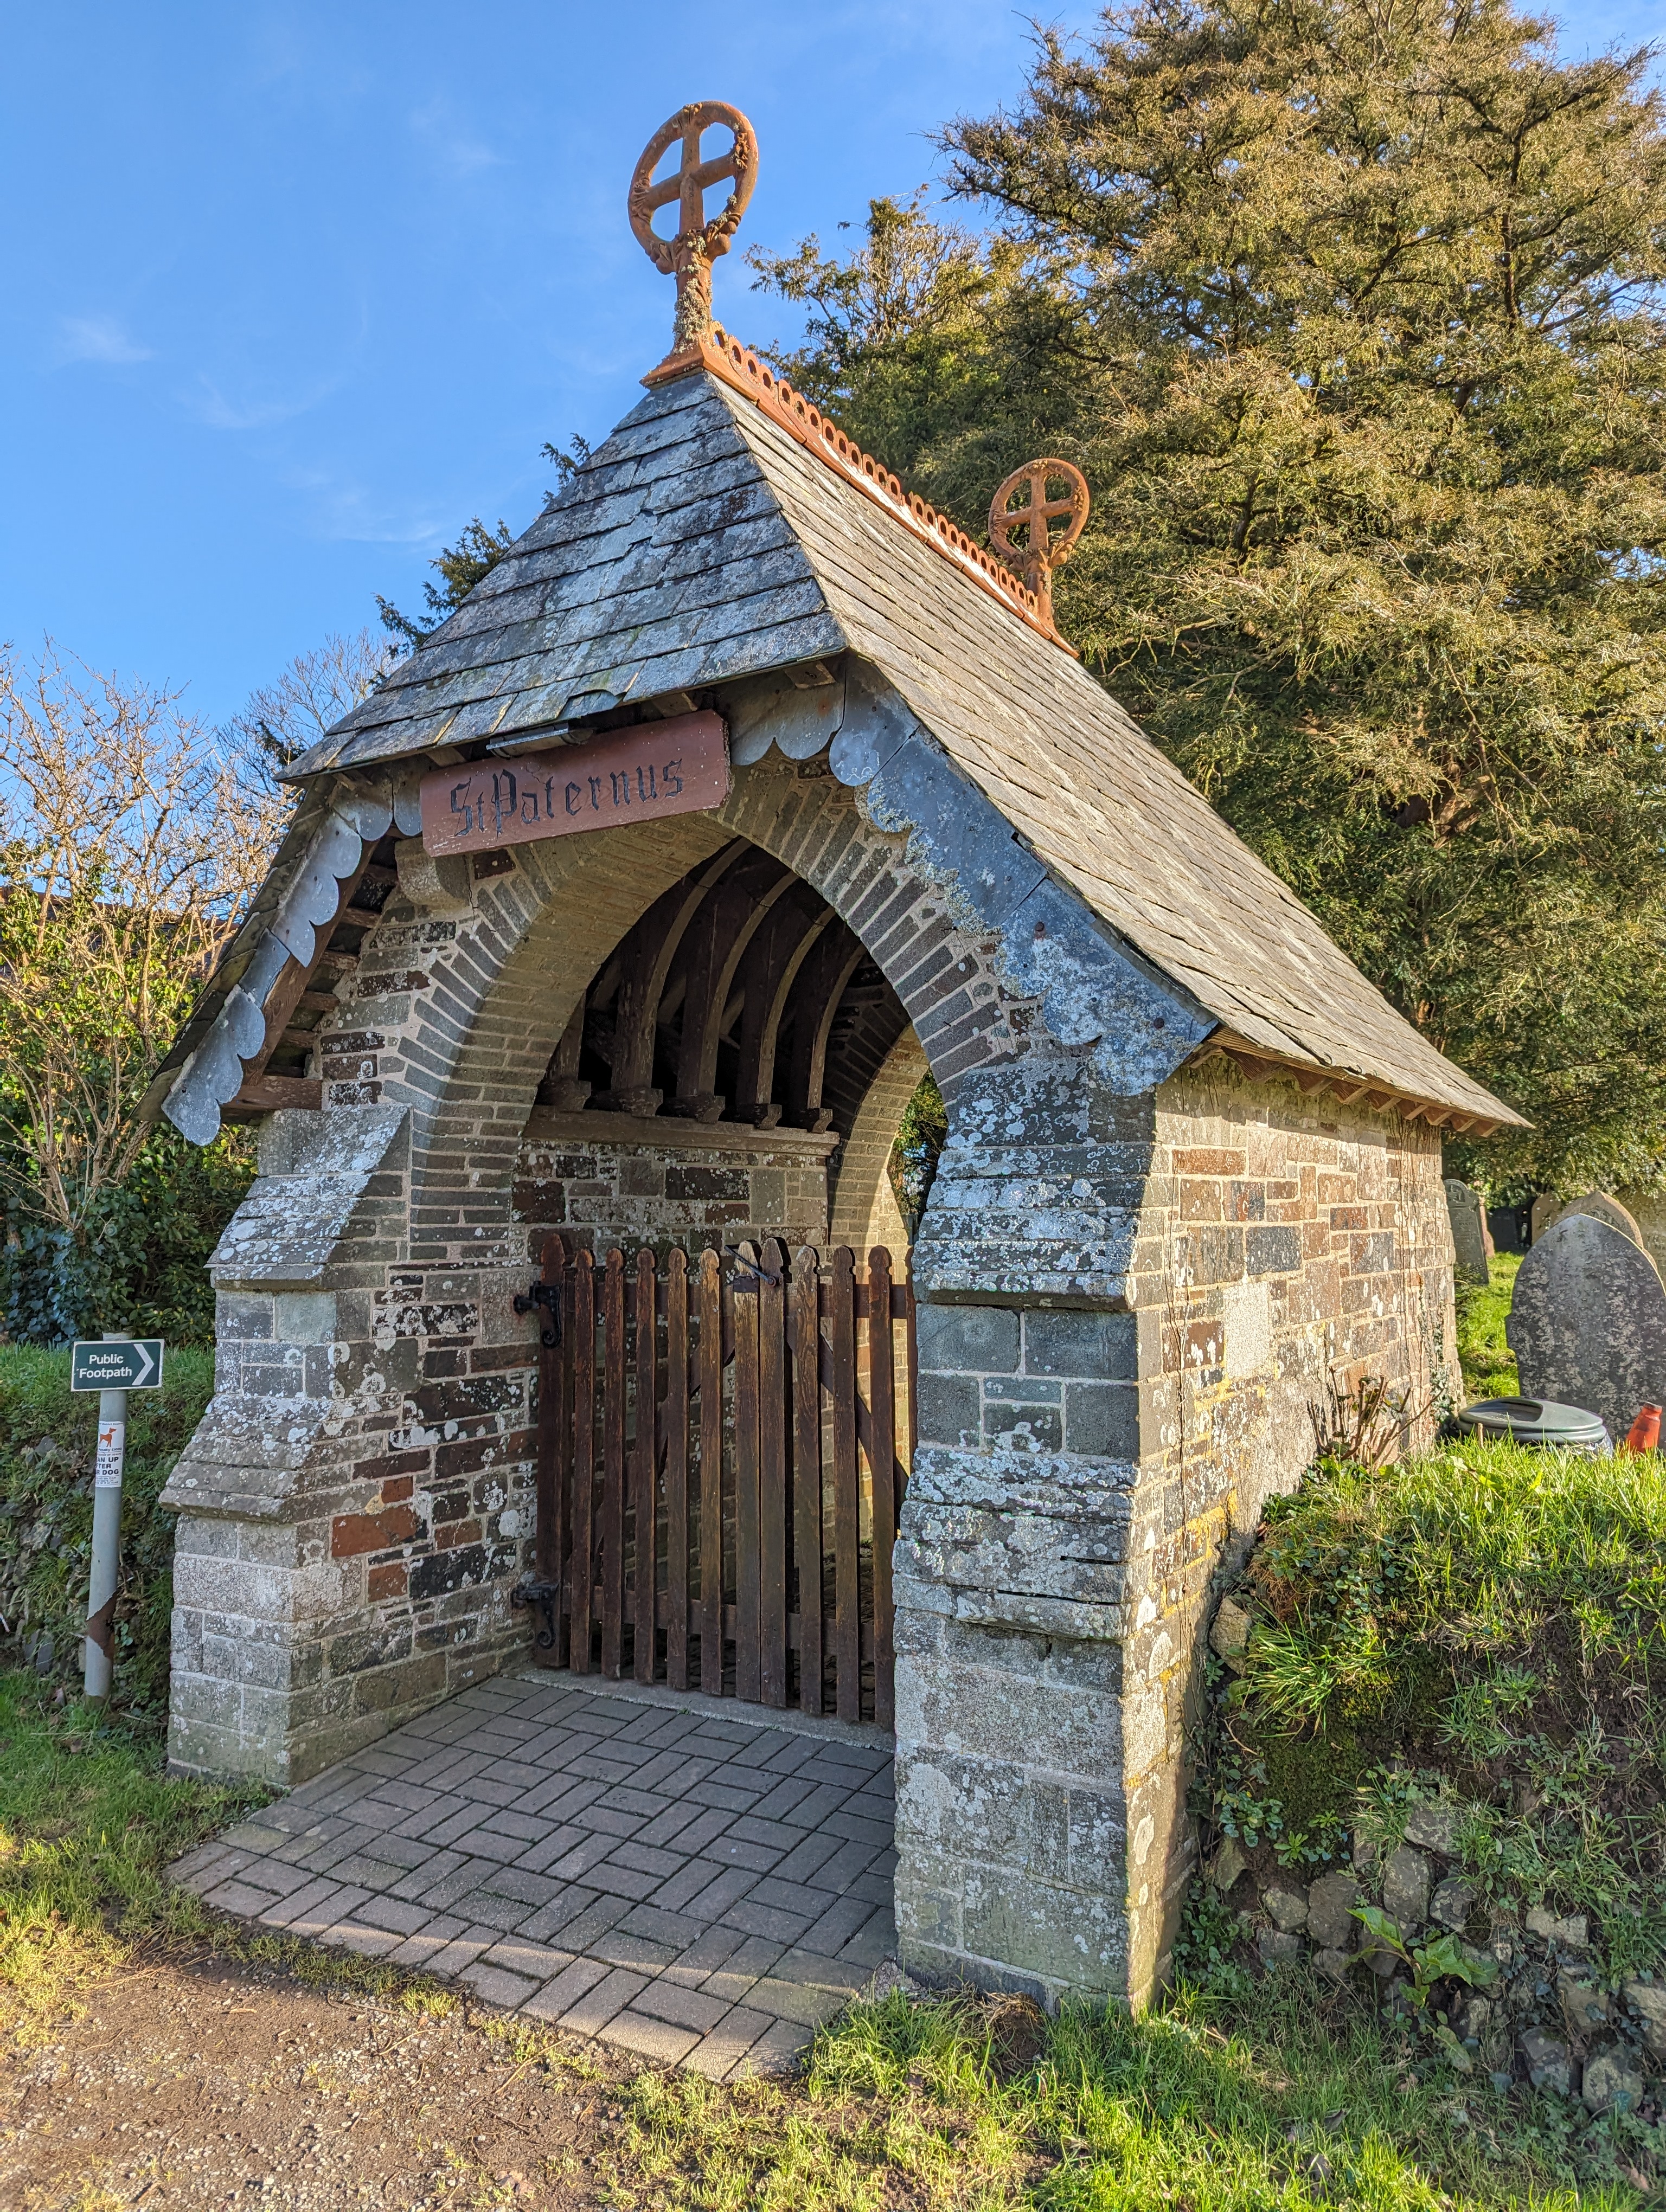 A portrait photograph of a stone entrance to a churchyard with a wooden gate and sloped tiled roof. A wooden sign above the entrance reads "St Paternus"